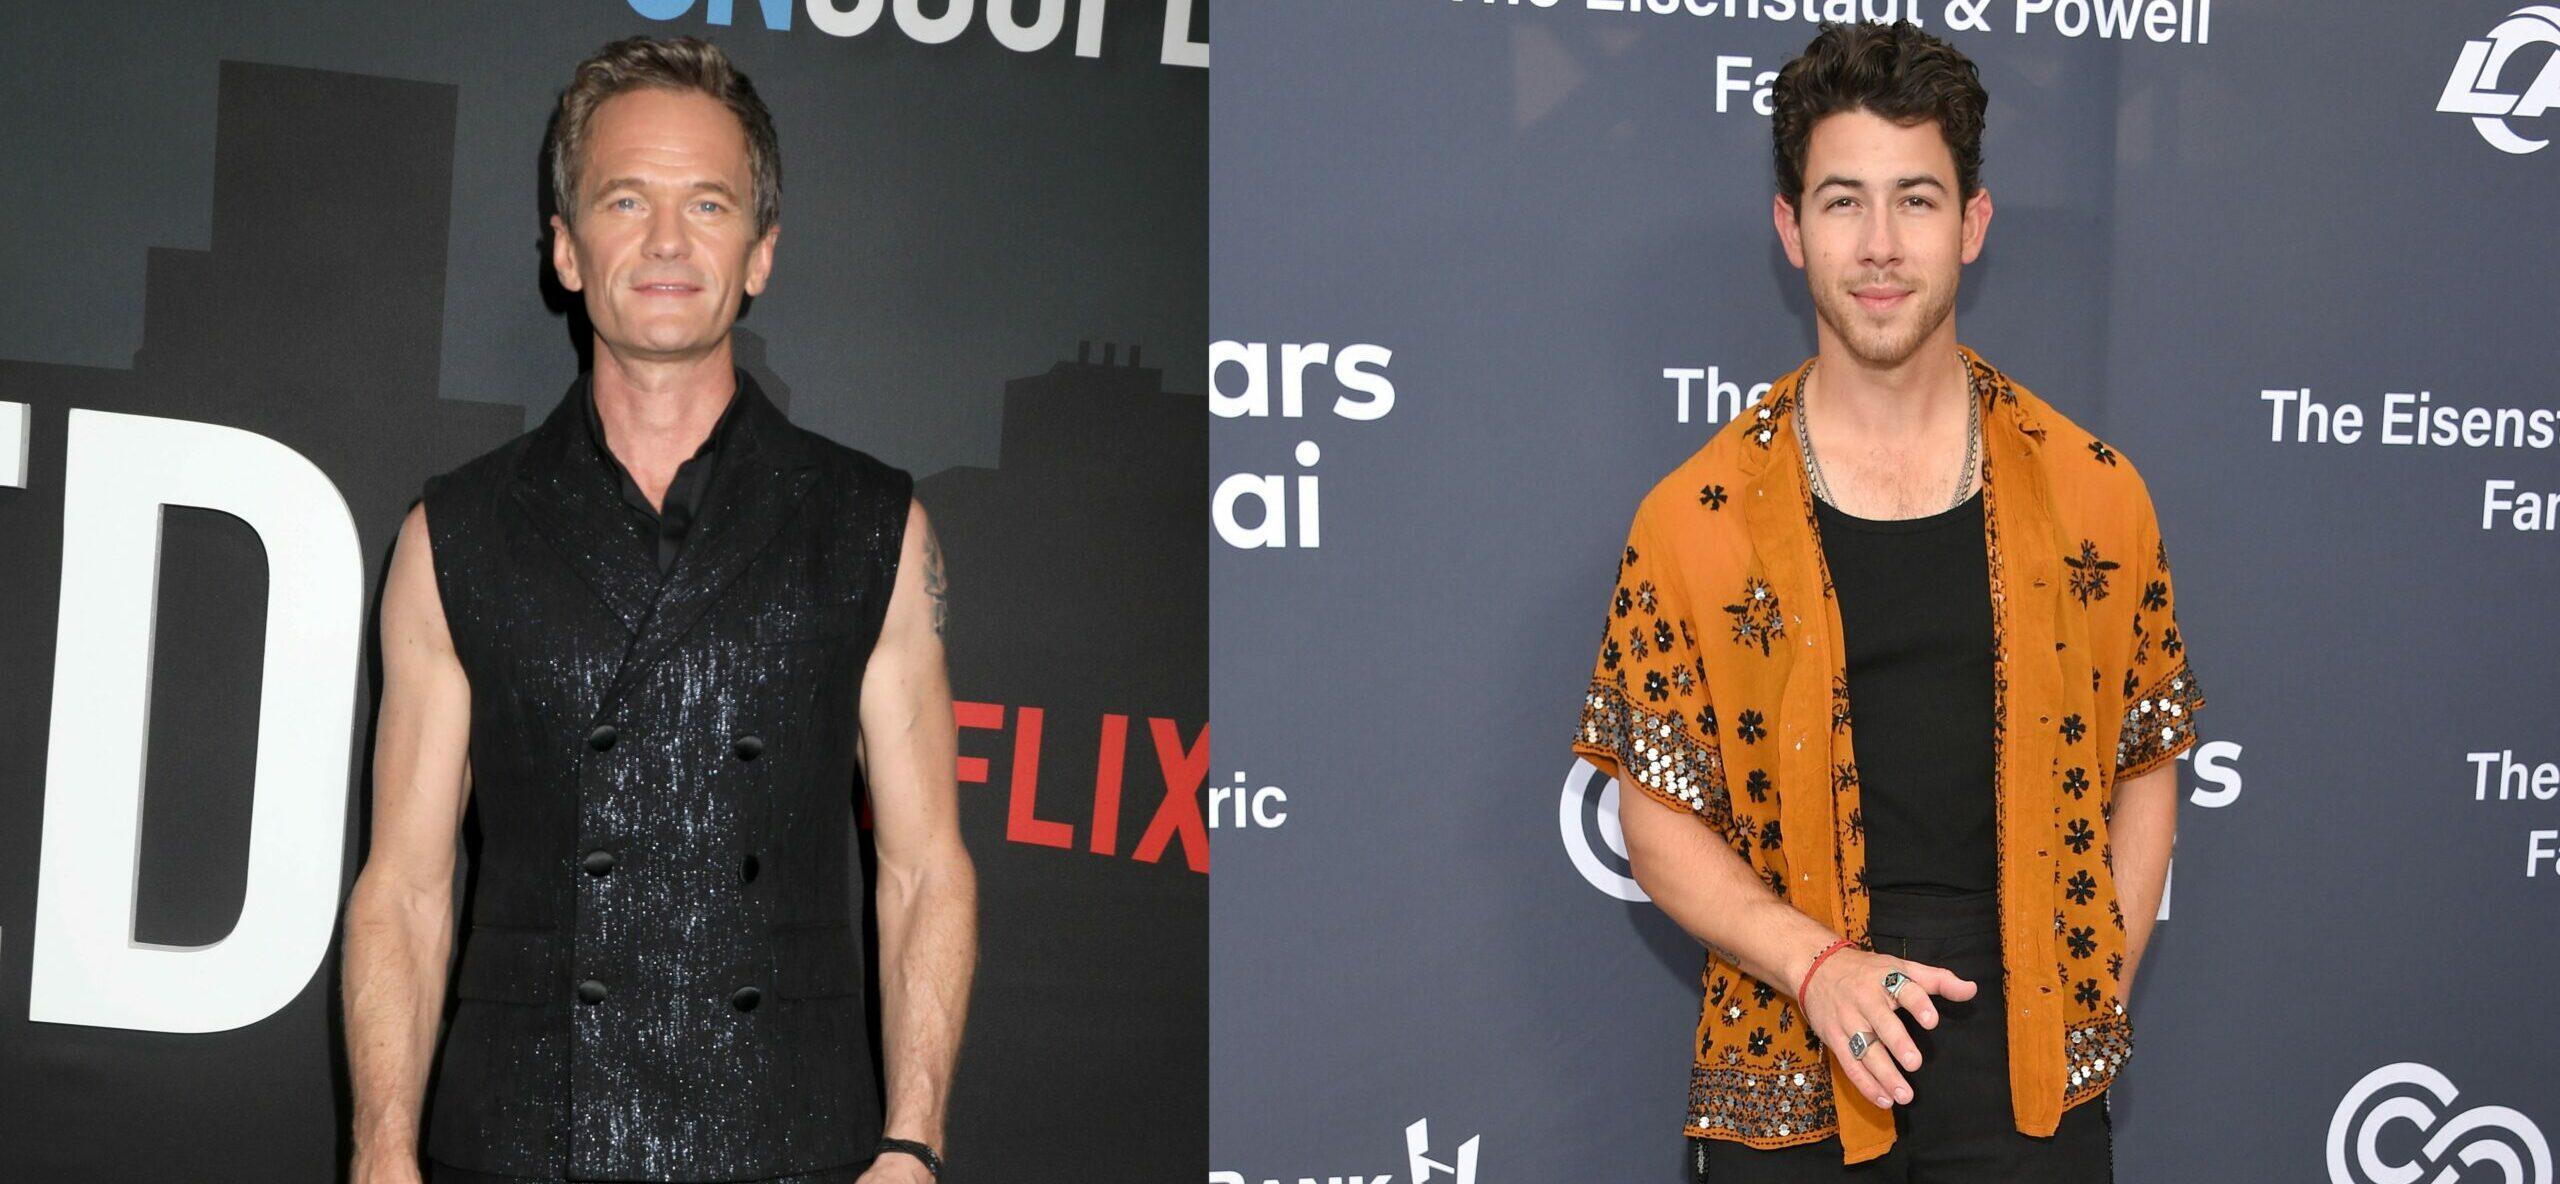 Neil Patrick Harris Faces Backlash For ‘Creepy’ Past Comments About Crushing On A Young Nick Jonas